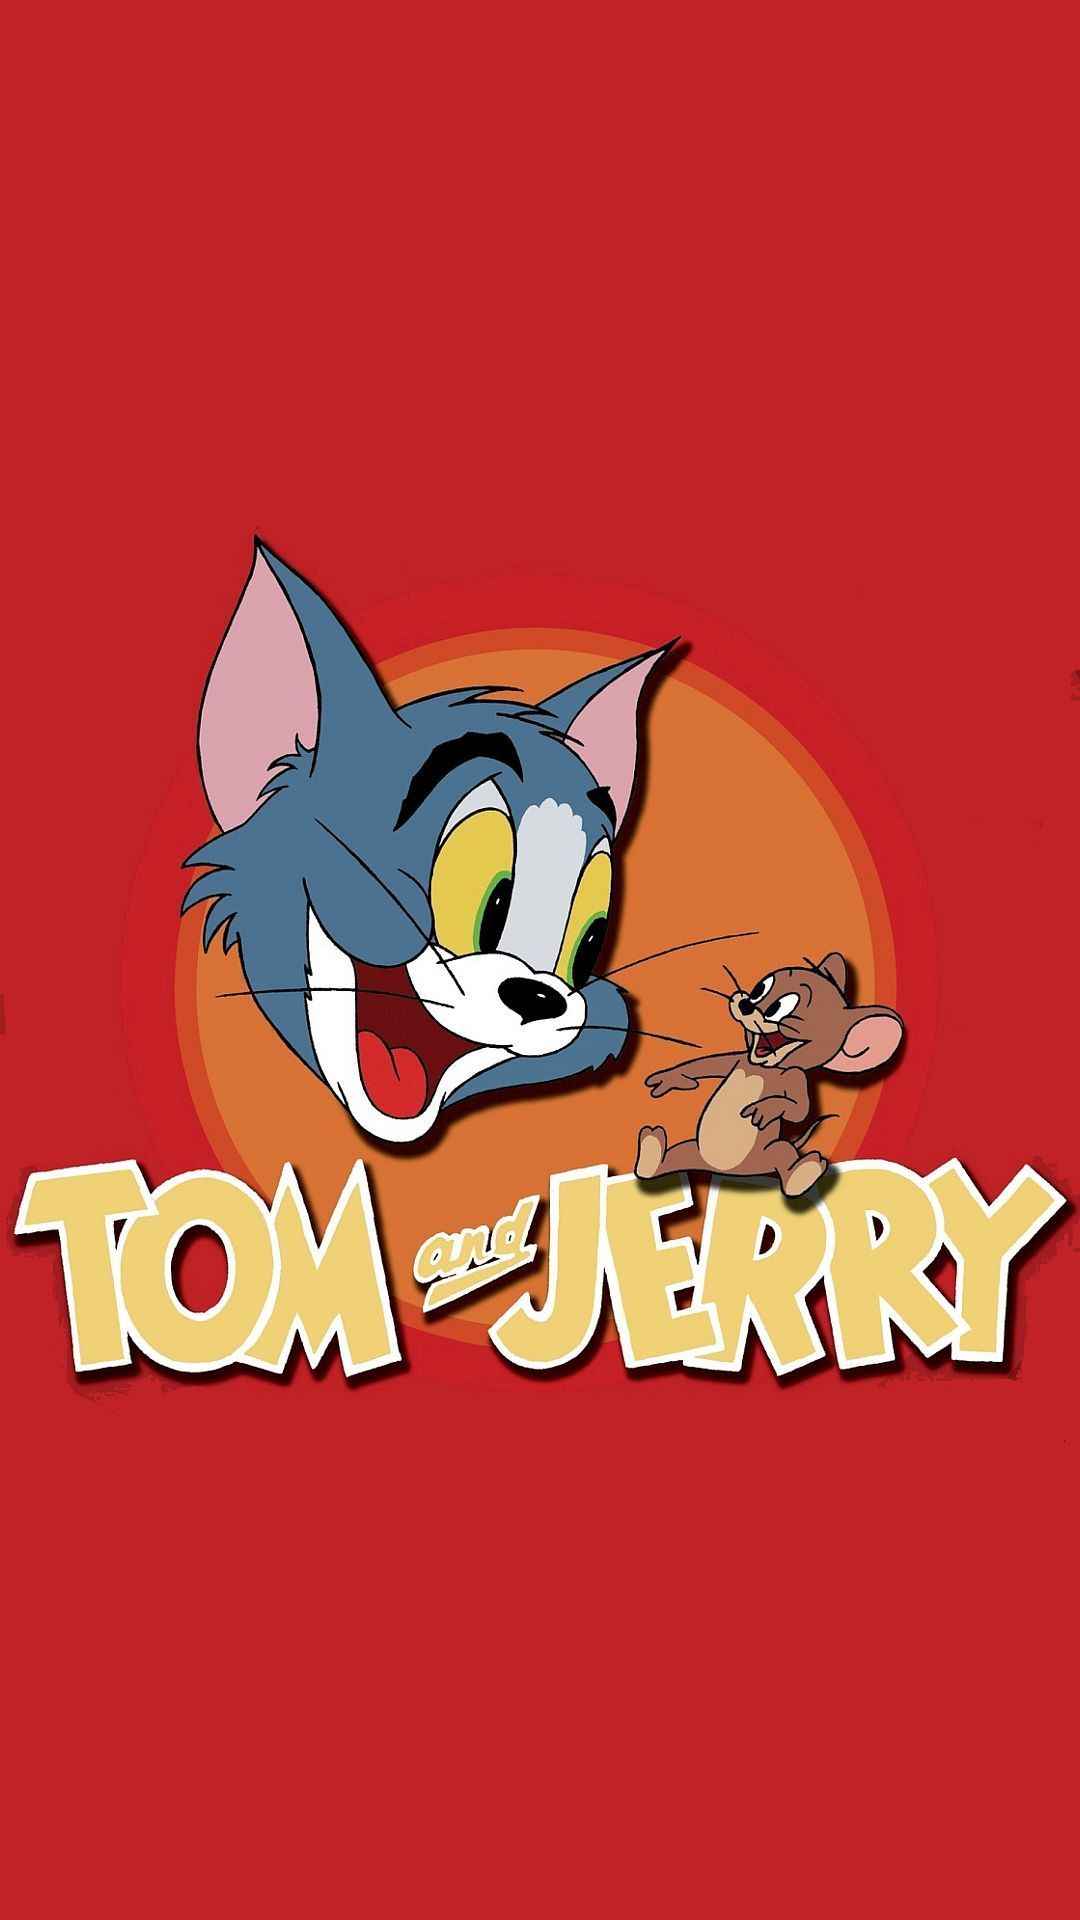 Tom and jerry logo - Tom and Jerry